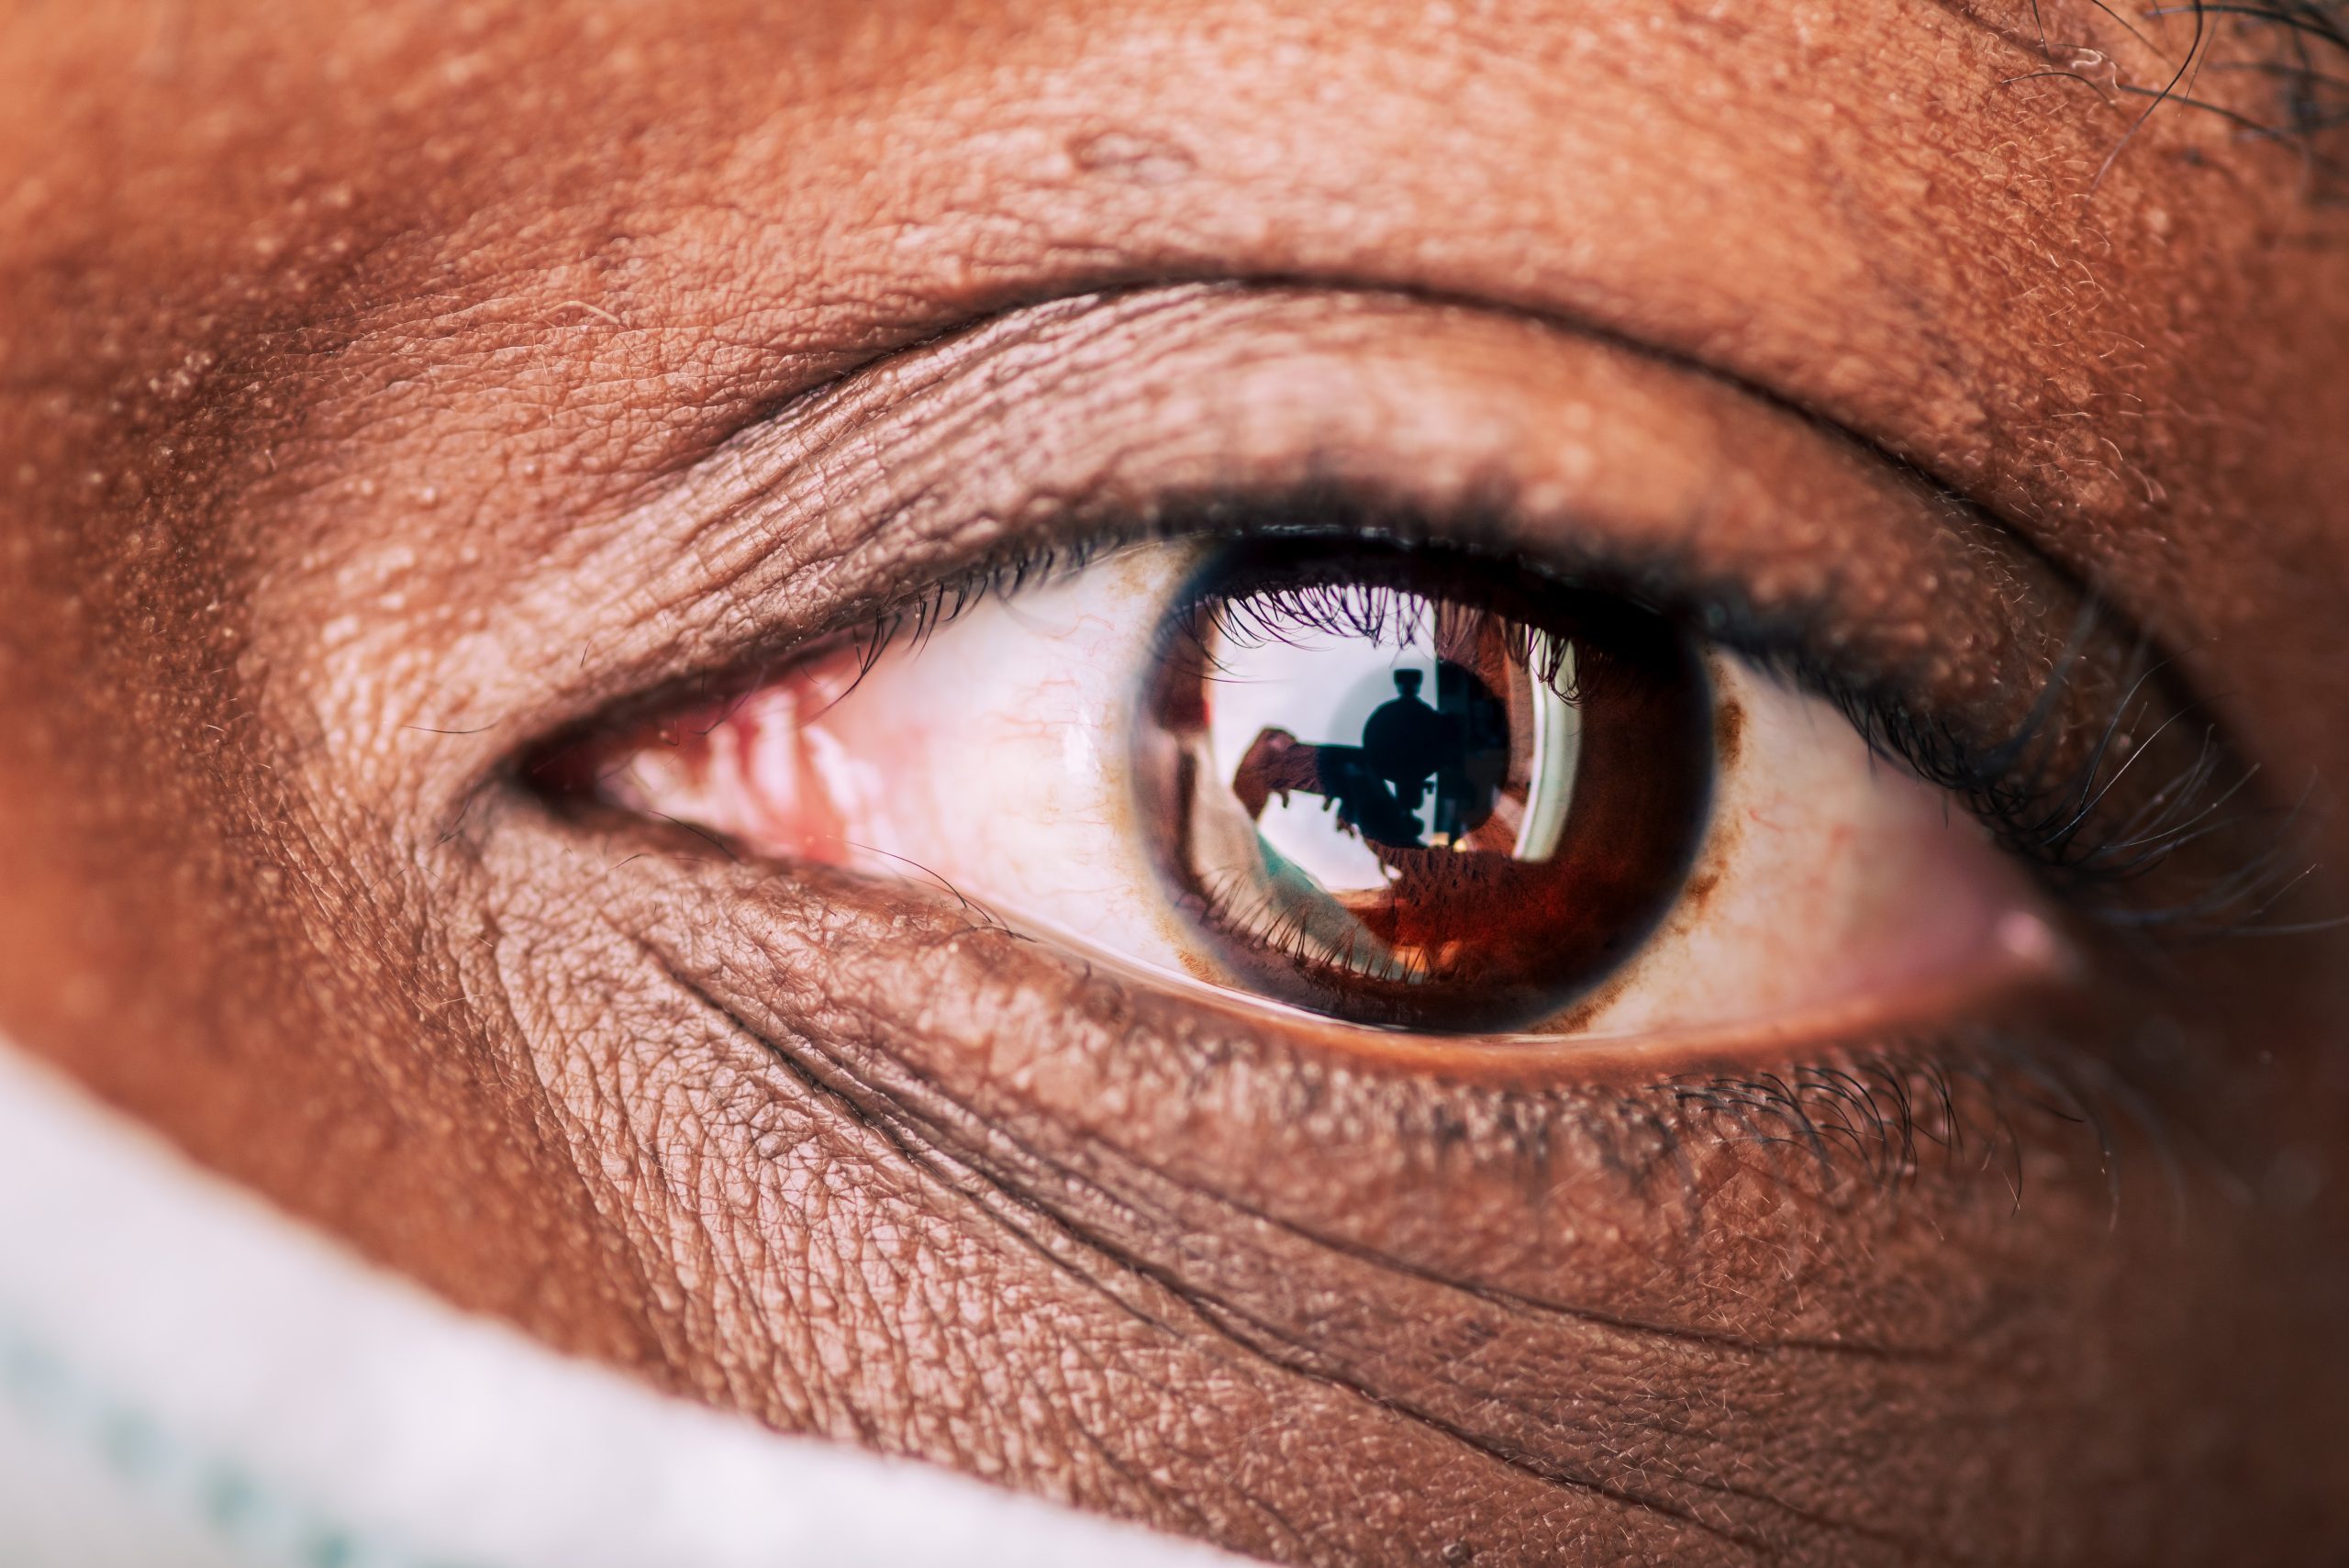 Exploring the Diverse Types of Conjunctivitis: Bacterial, Viral, Allergic, and Others